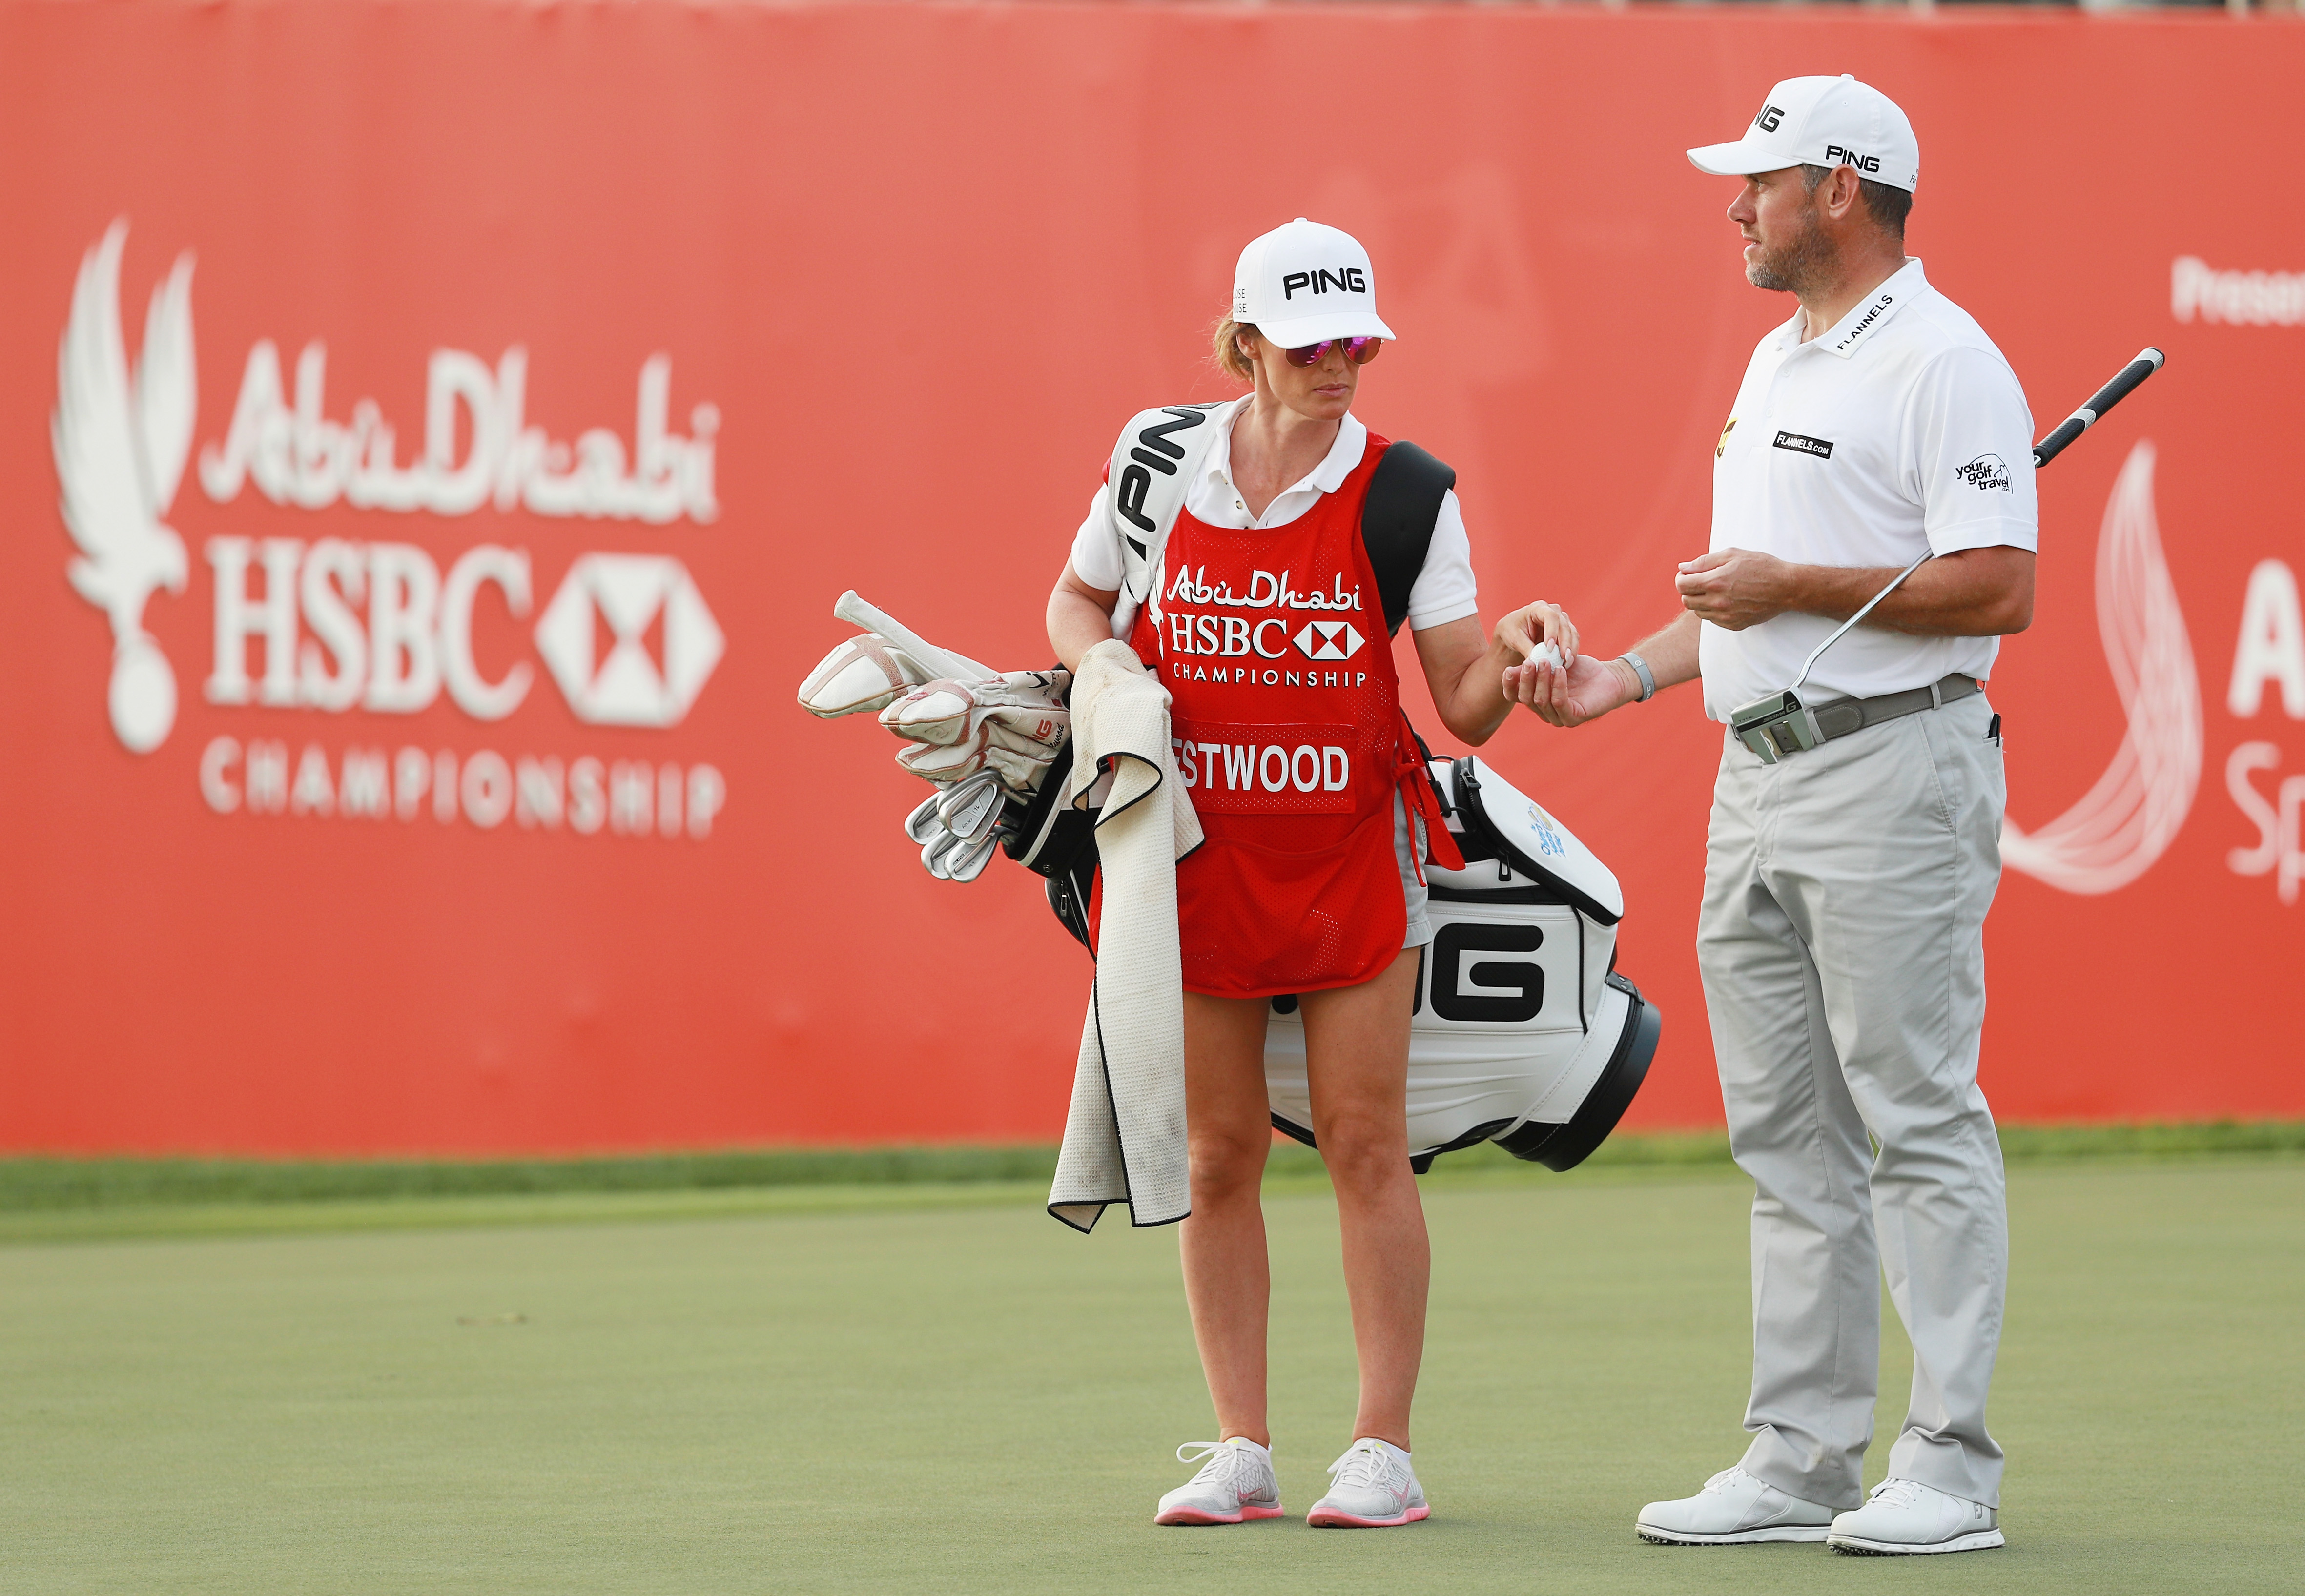 Westwood's girlfriend stands in as caddy in Abu Dhabi